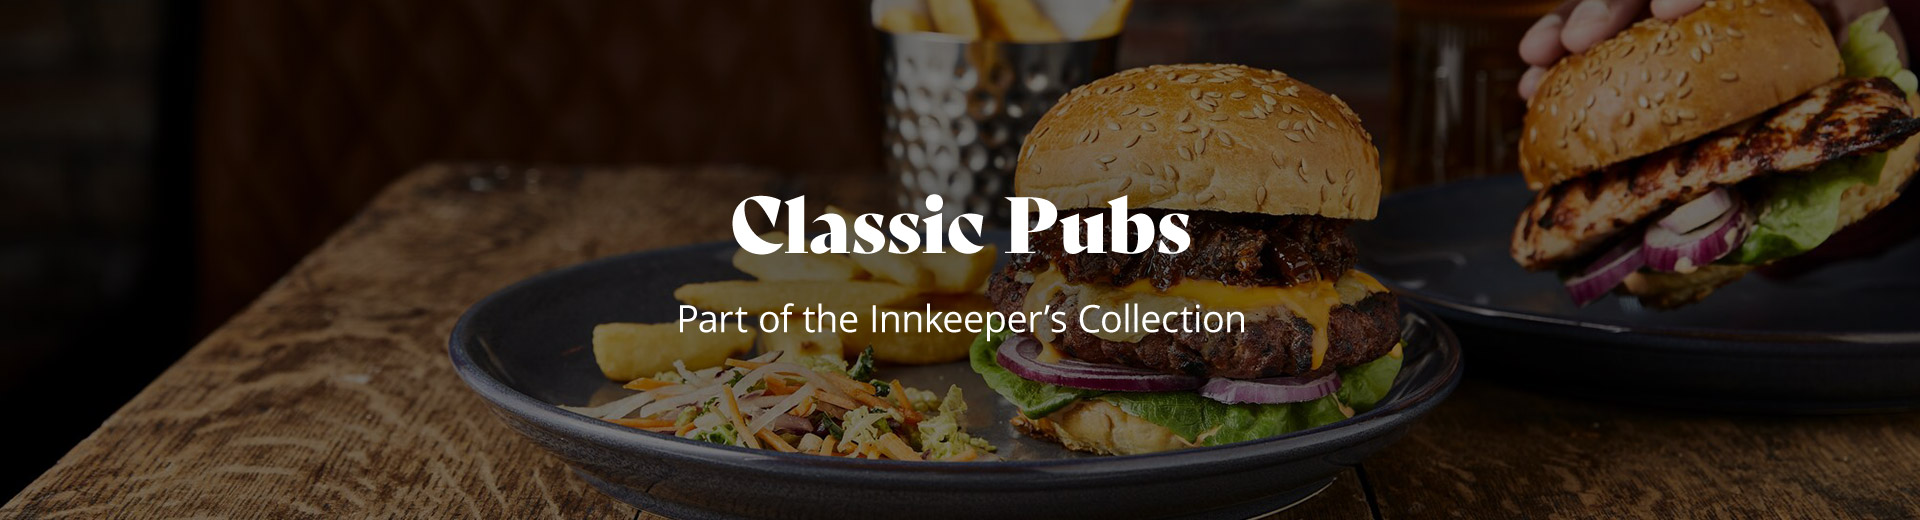 Food and Drink at Classic Pubs